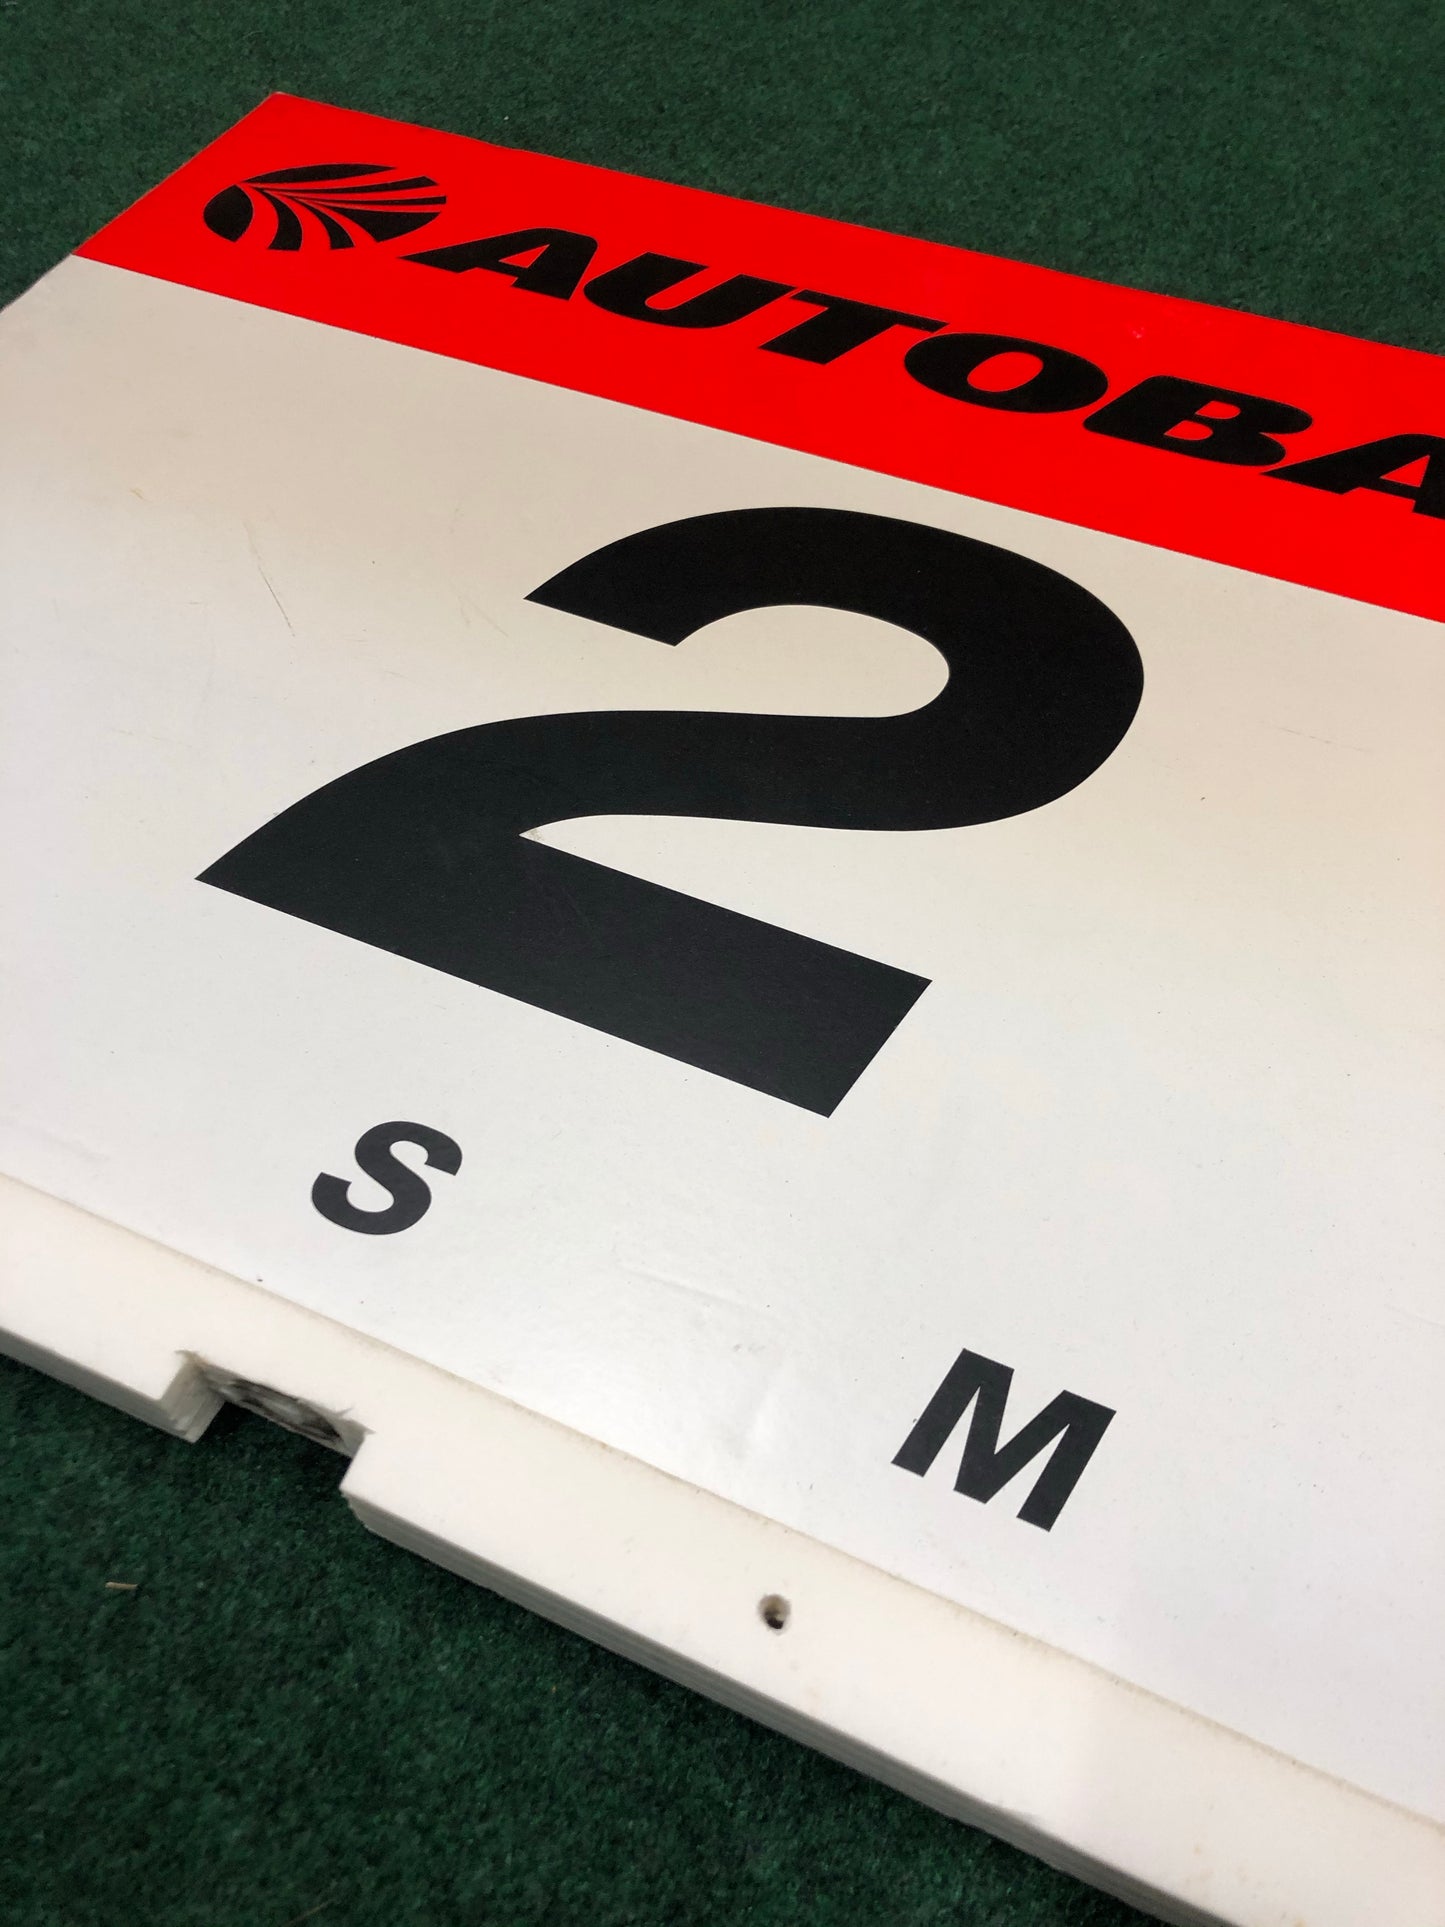 Nismo #2 Autobacs JGTC Race Day Grid Board Sign